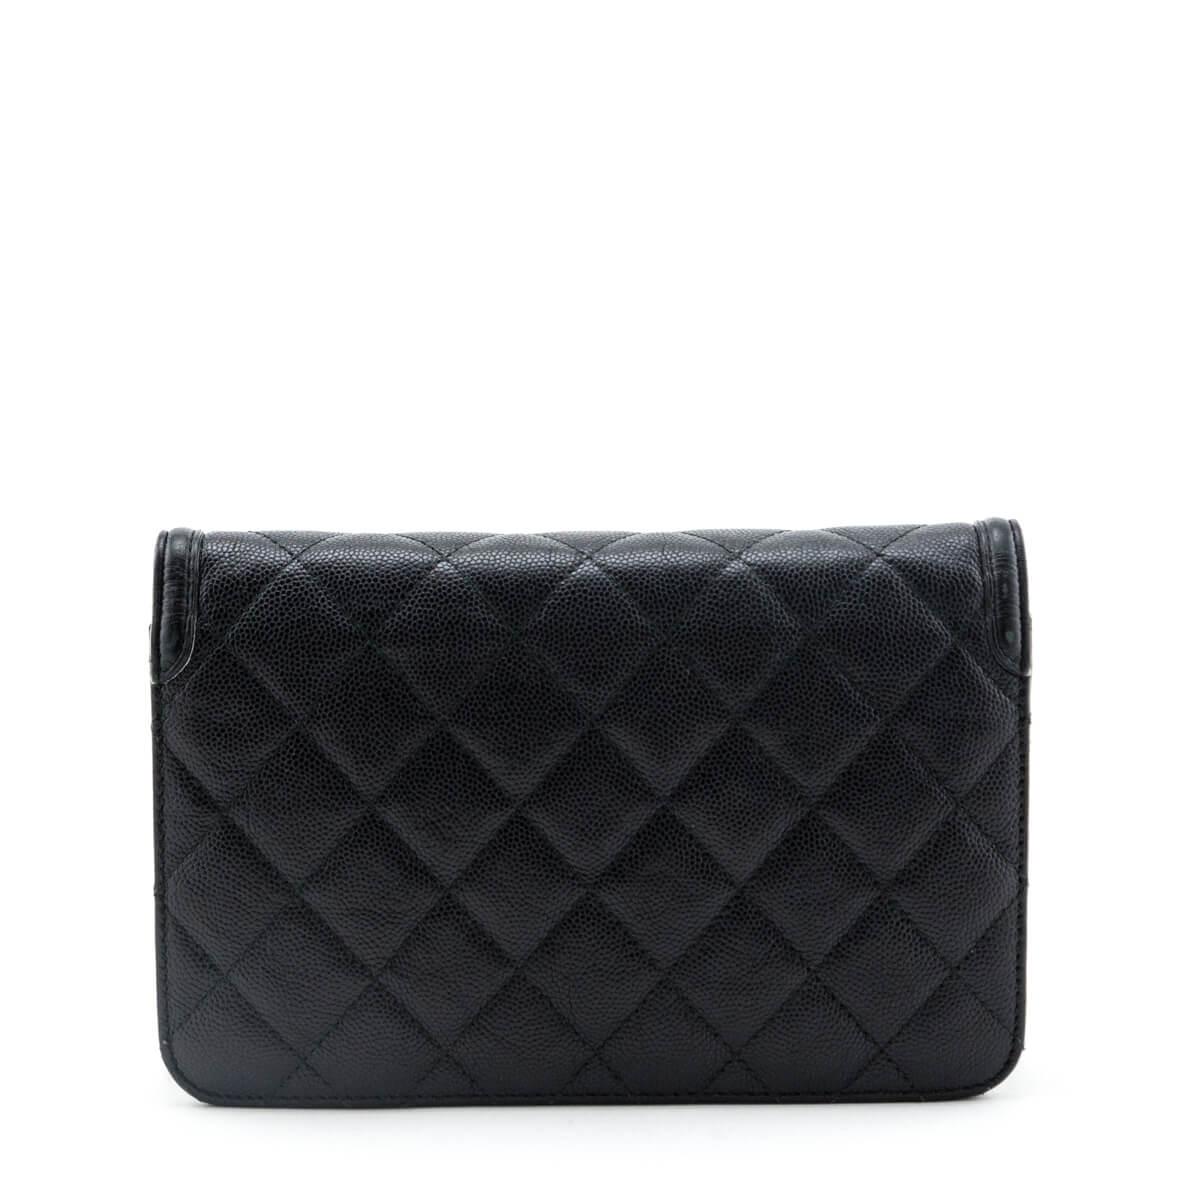 Chanel Black Quilted Caviar CC Filigree Chain Wallet - Chanel Handbags